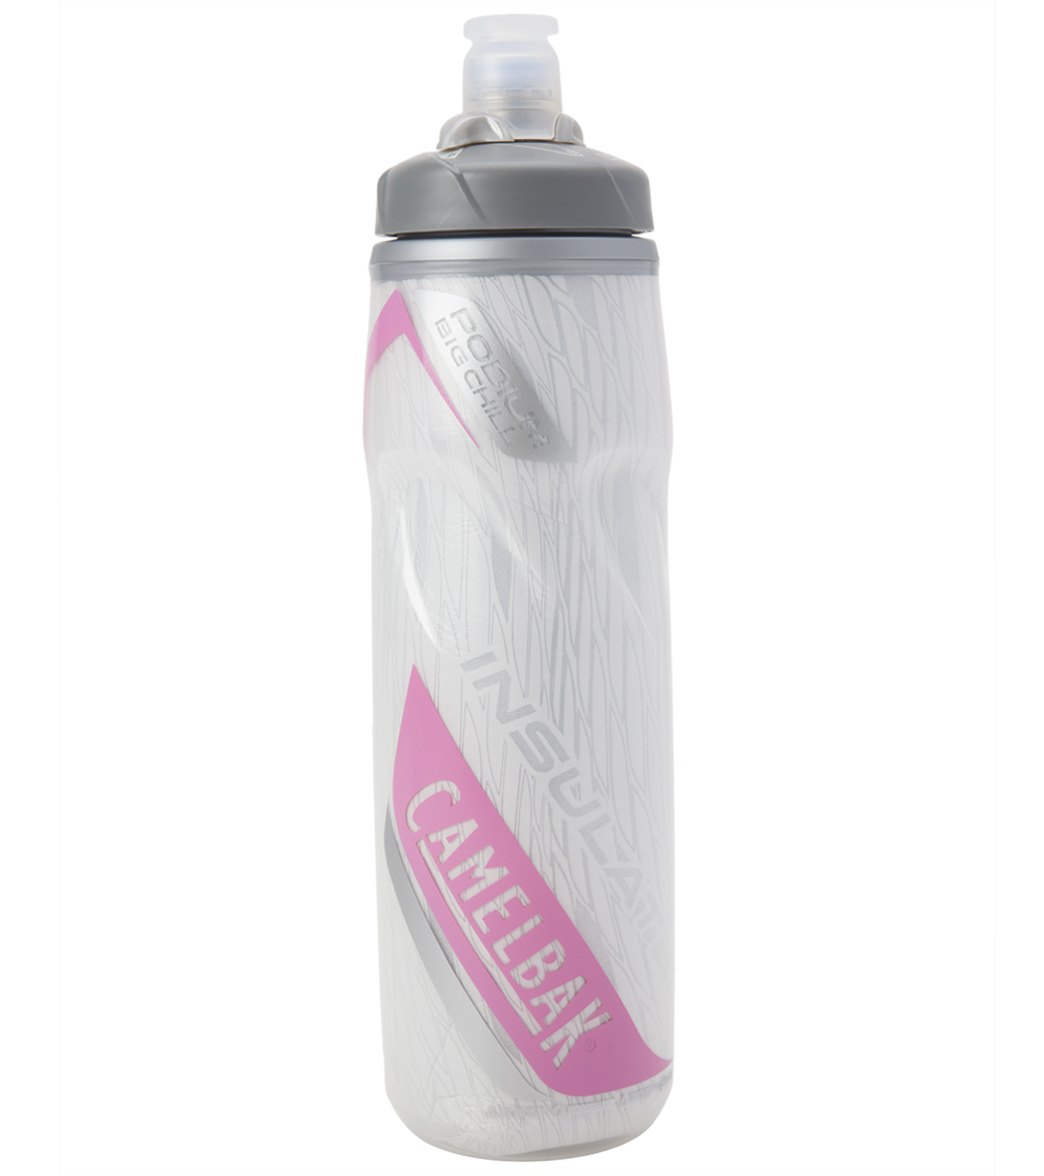 https://www.shopeverydayyoga.shop/wp-content/uploads/1692/23/explore-our-camelbak-podium-big-chill-25-oz-water-bottle-pink-camelbak-collection-and-find-inspiration-get-them-now_0.jpg